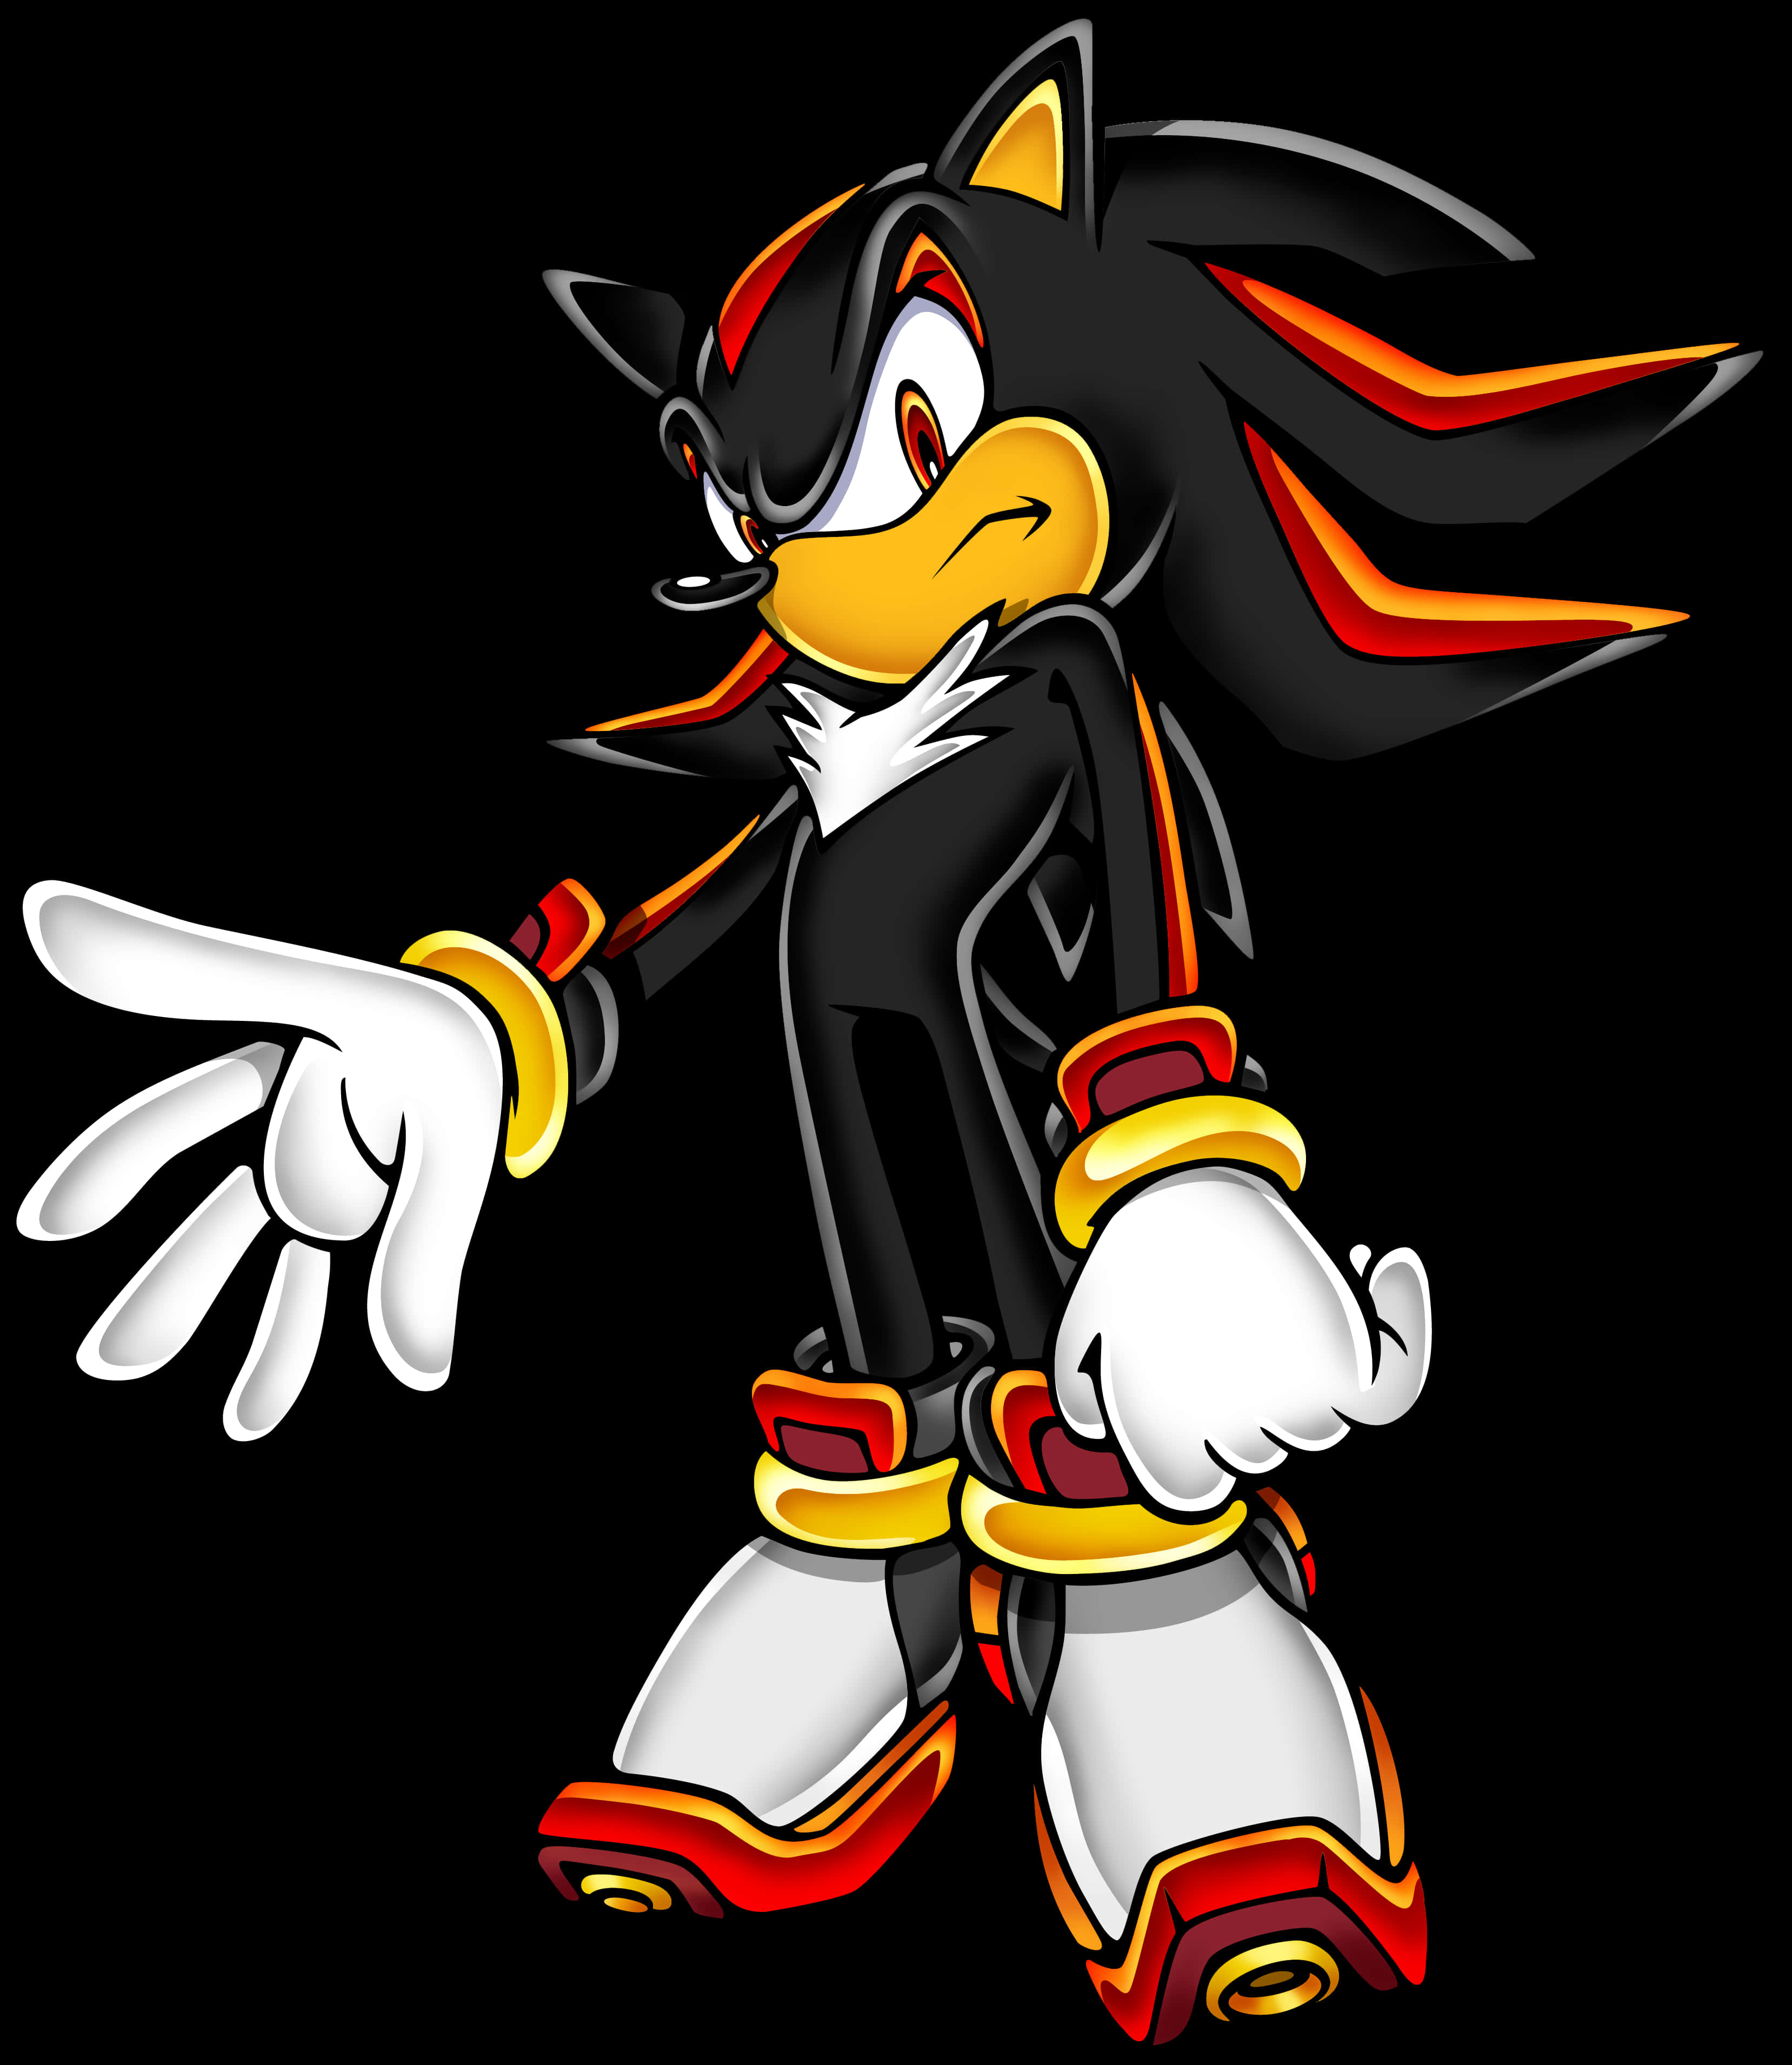 A Cartoon Character Of A Black And Orange Sonic